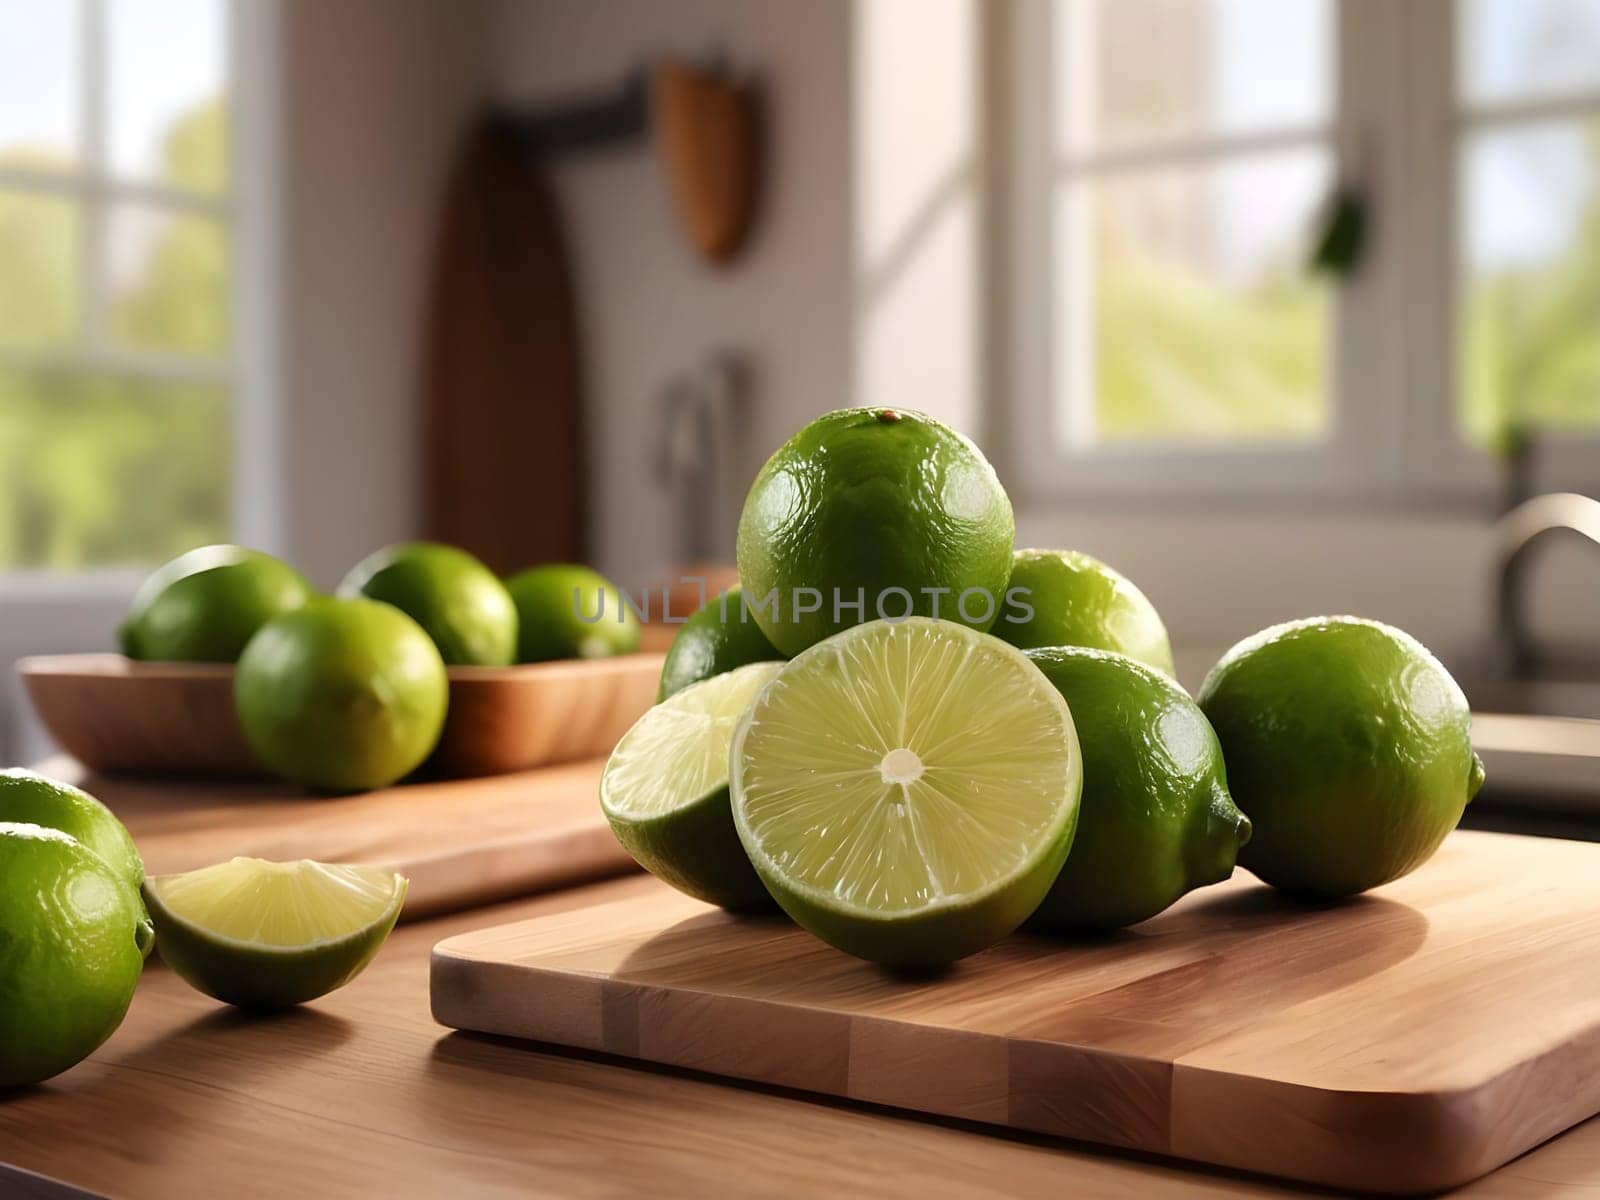 Citrus Glow: Limes Basking on a Wooden Cutting Board in Soft Afternoon Light.